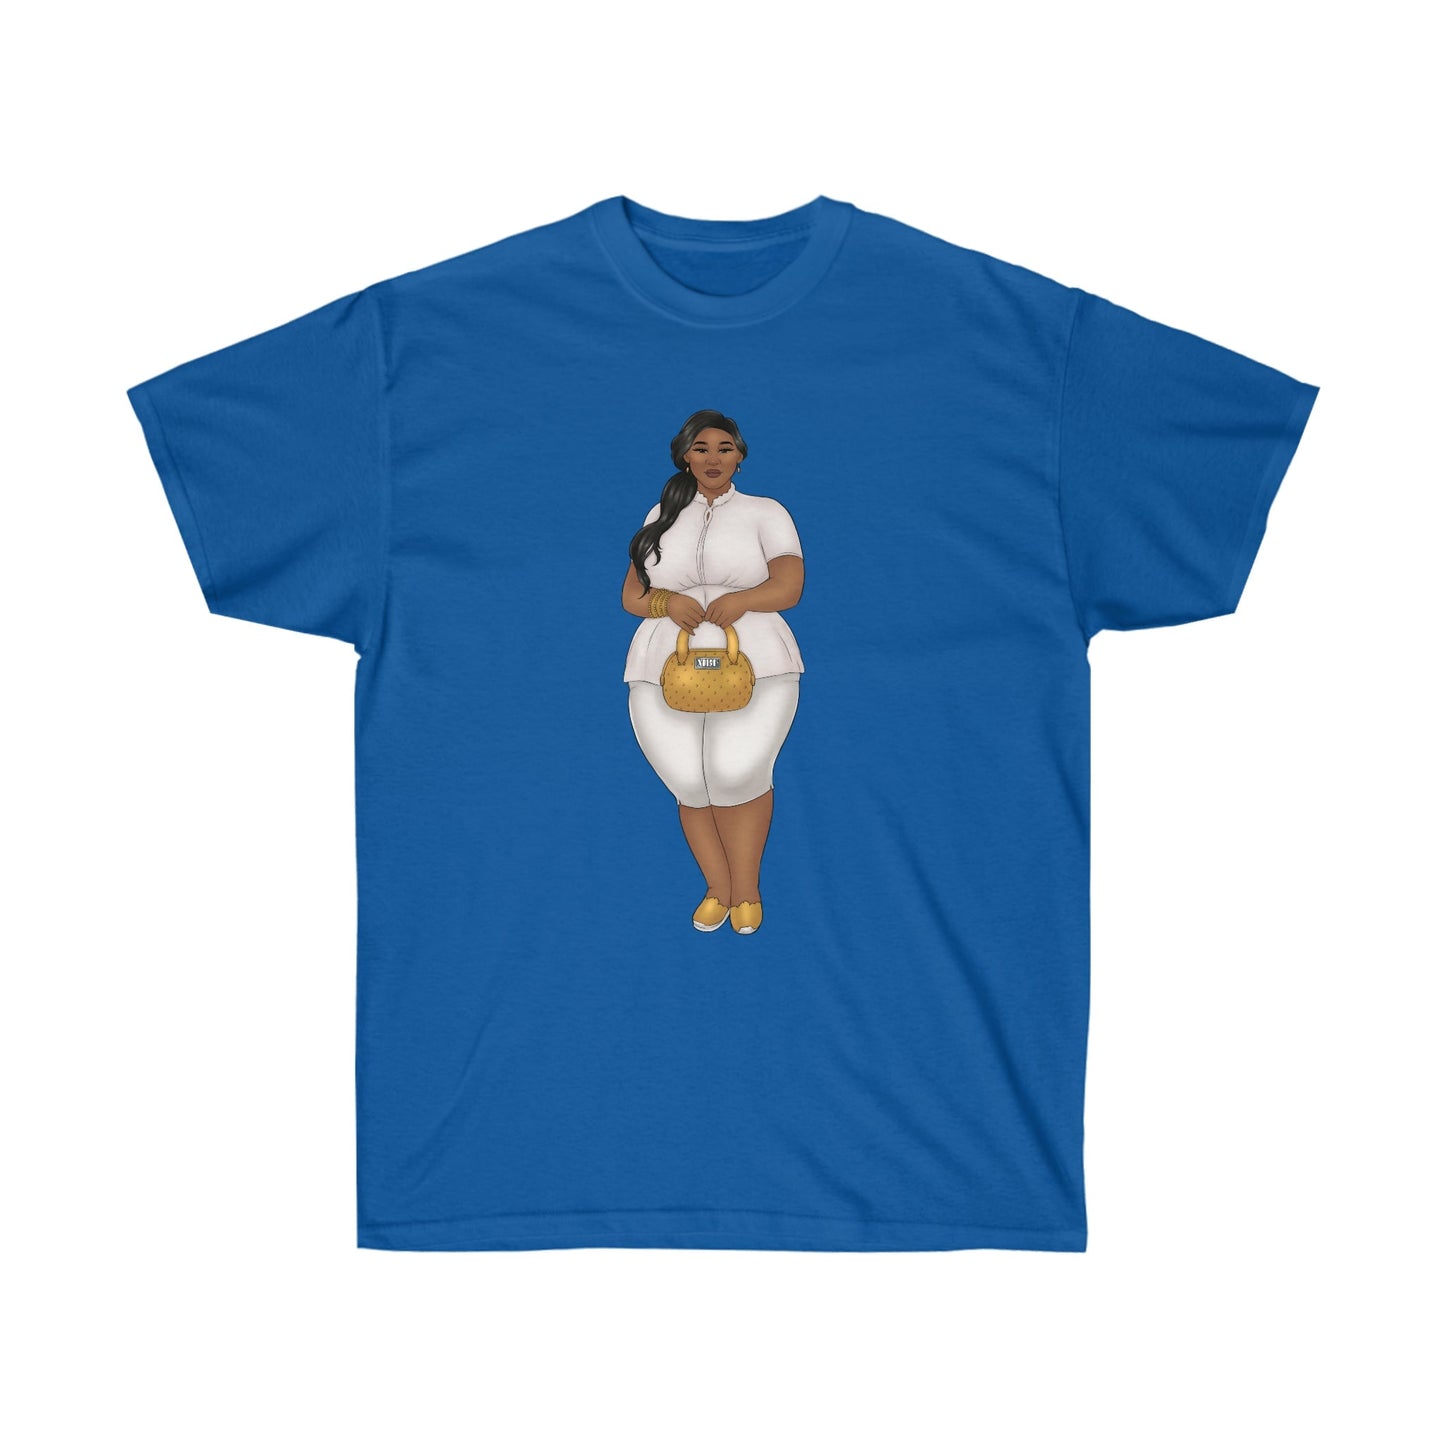 Nicole Show Off Your Fluff Unisex Ultra Cotton Tee S- 5XL T-Shirt Printify Royal S 